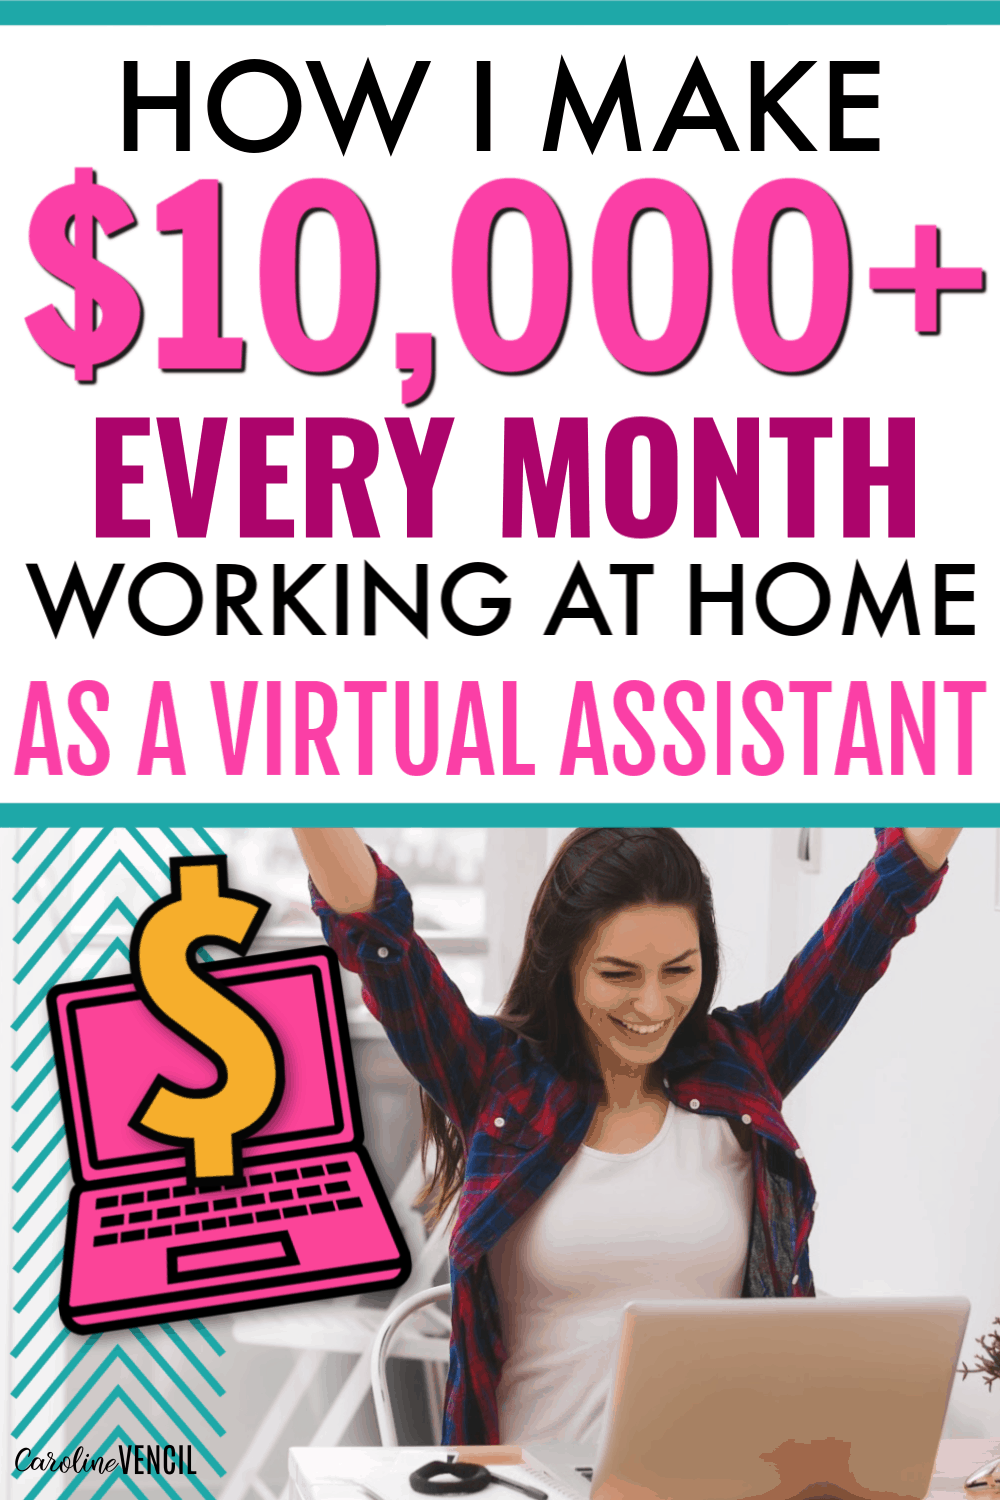 You don't need a college degree to start working from home as a virtual assistant and make a full time income. This beginner's guide will help you launch a successful VA or virtual assistant career while you work at home with absolutely no experience required! How I Make a Full Time Income Working at Home as a Virtual Assistant.